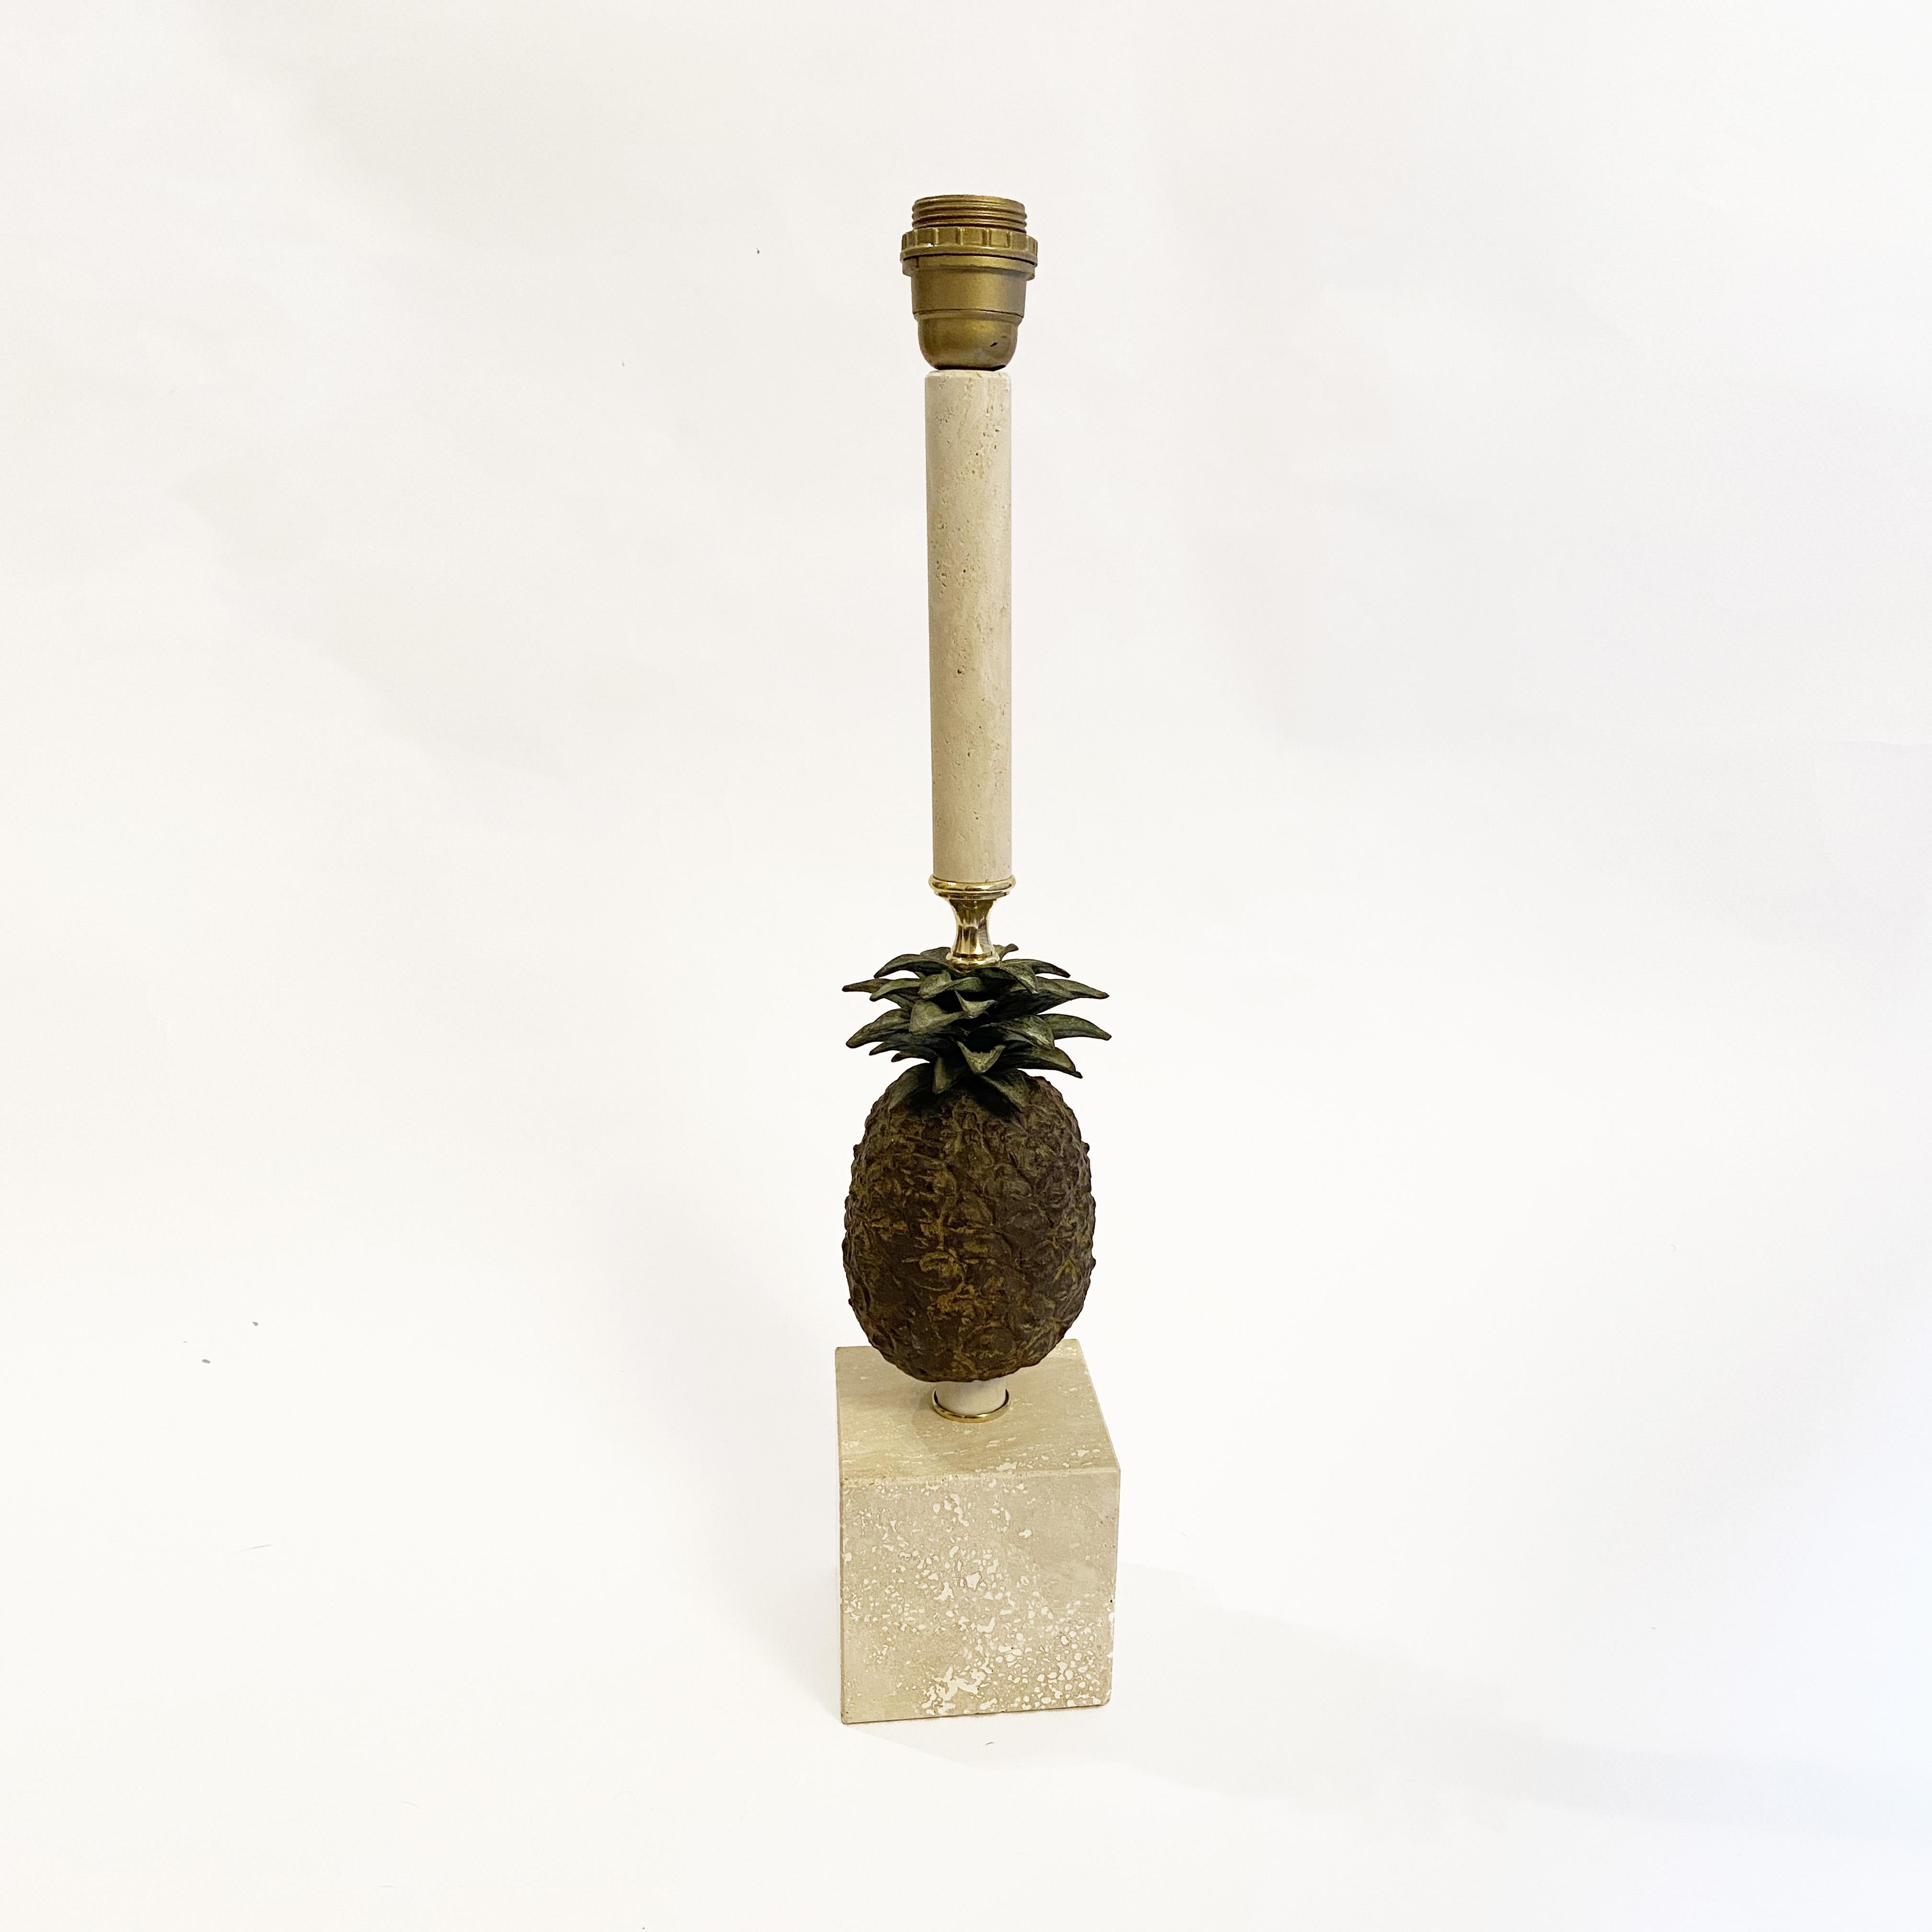 Hollywood Regency Pineapple table lamp in Patined Bronze and Travertine, 1970s.